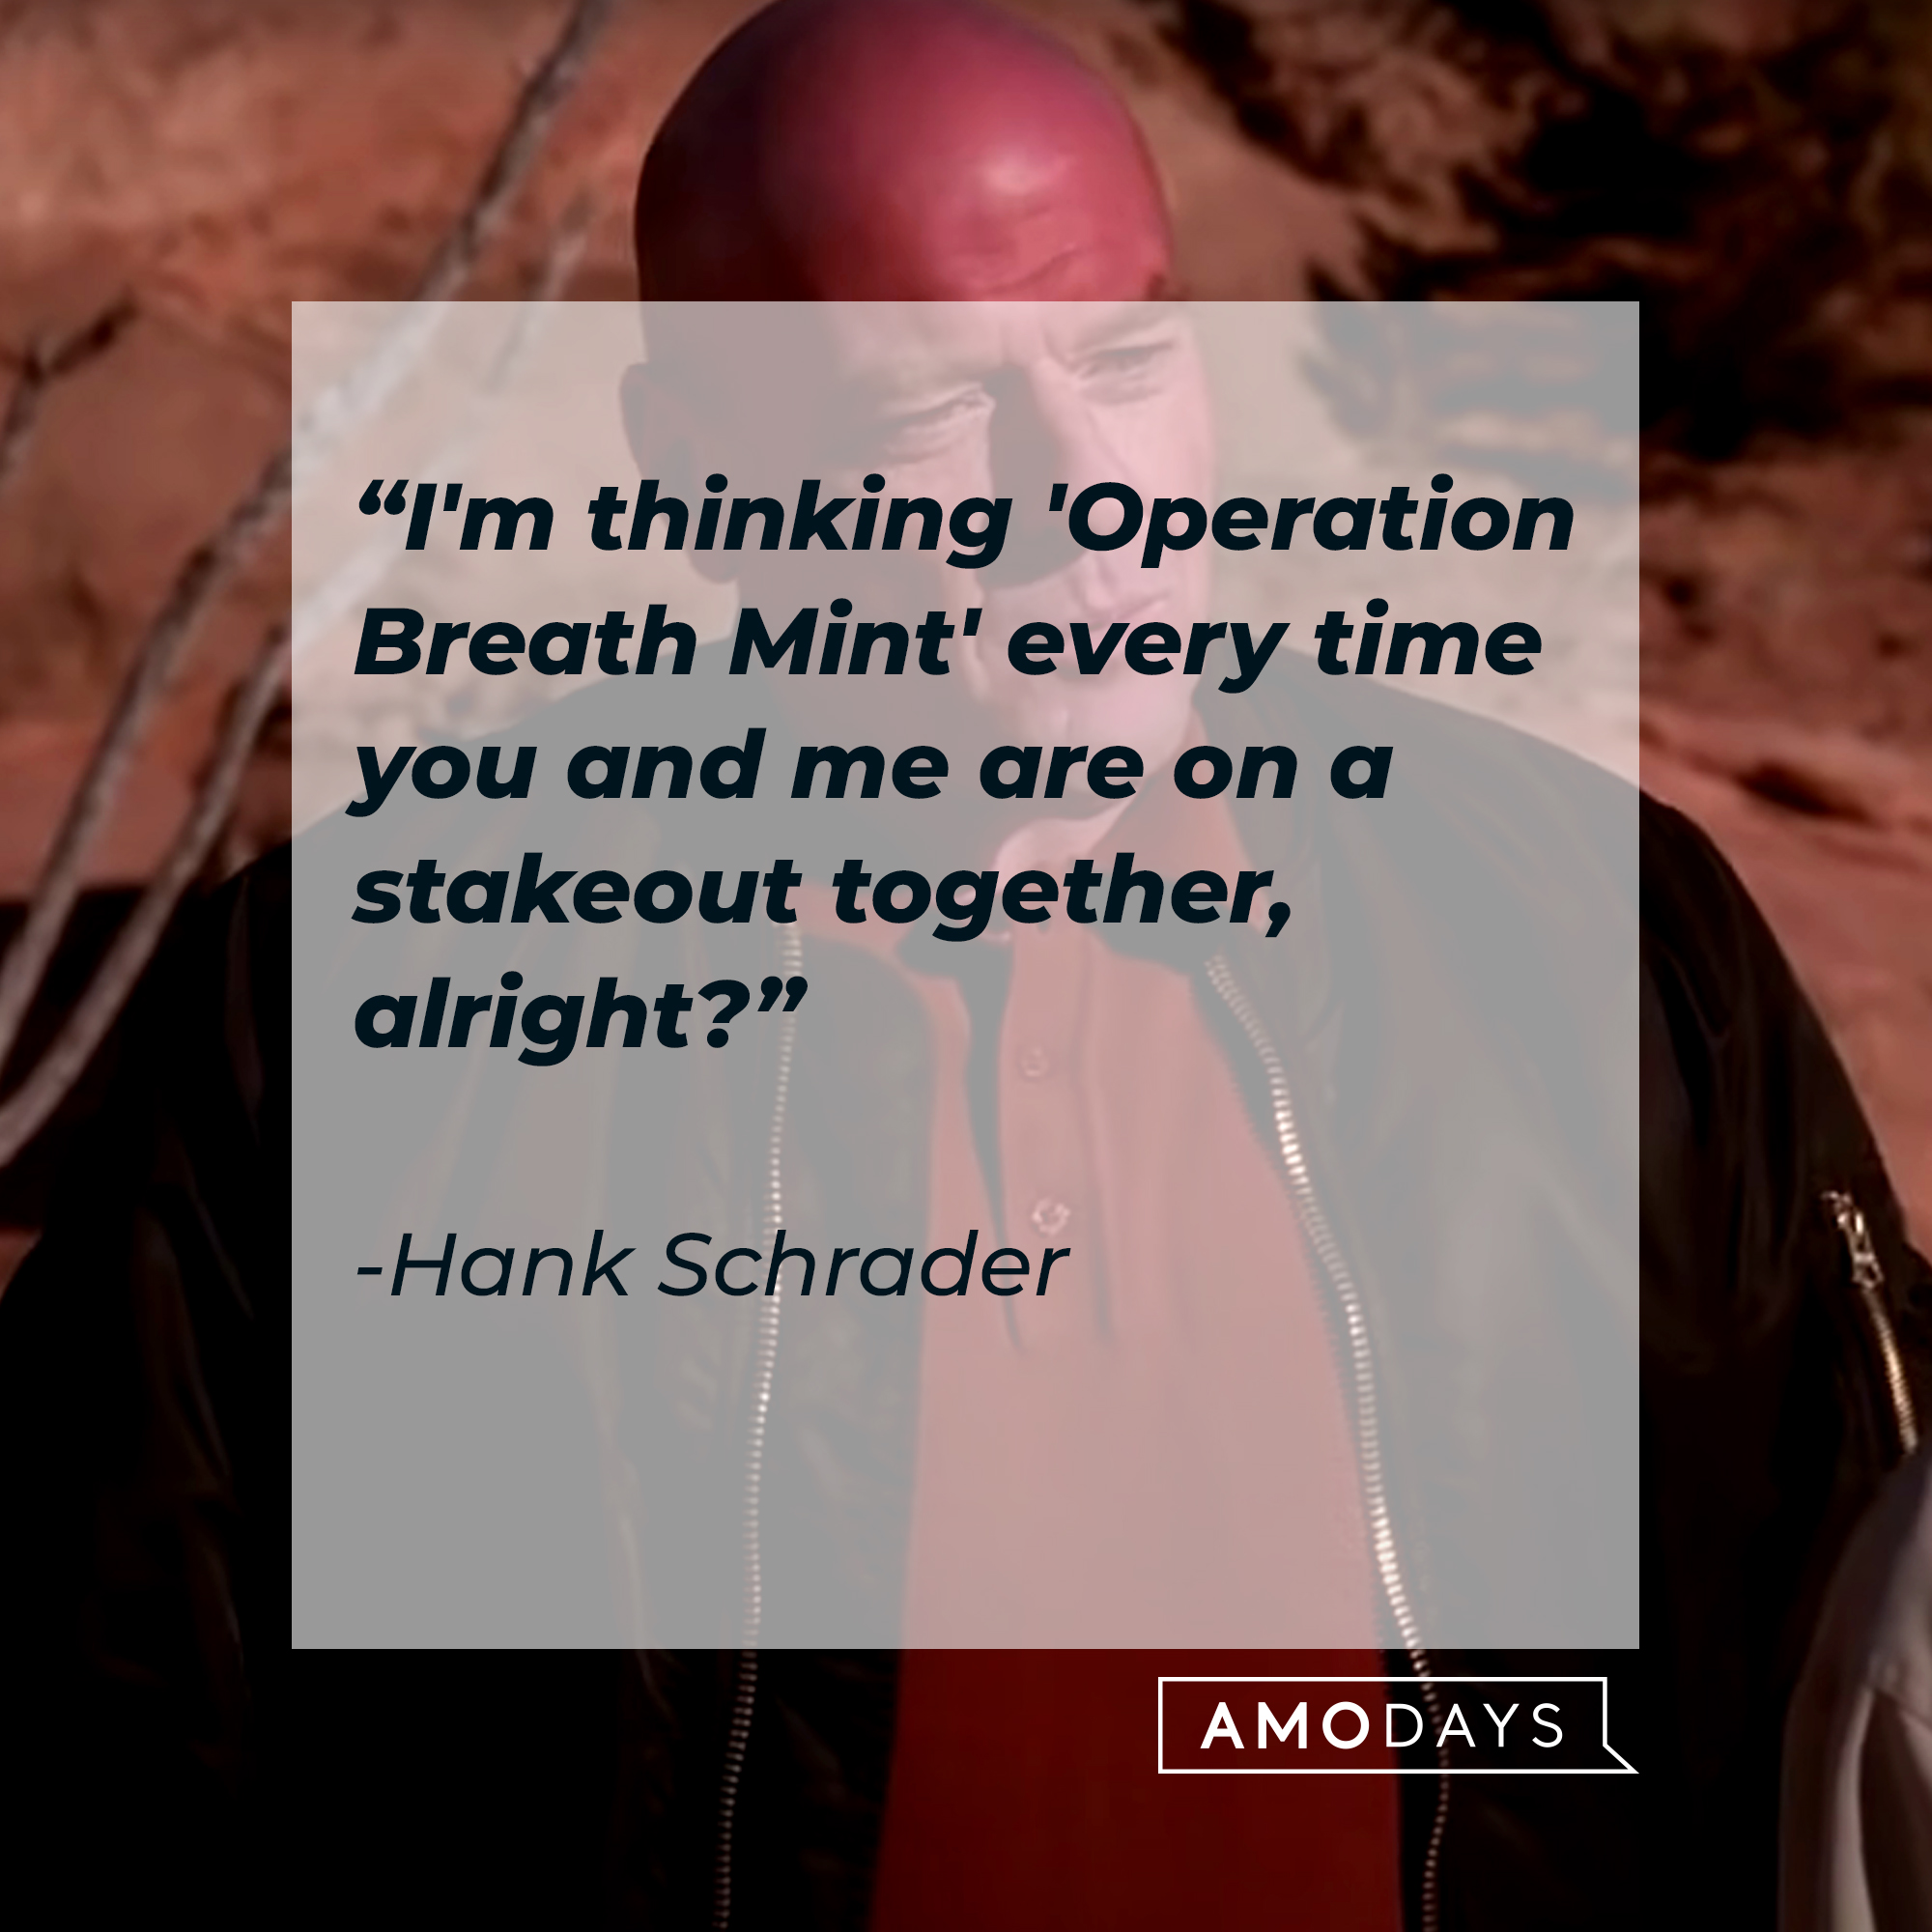 An image of Hank Schrader, with his quote: "I'm thinking 'Operation Breath Mint' every time you and me are on a stakeout together, alright?" | Source: Youtube.com/breakingbad